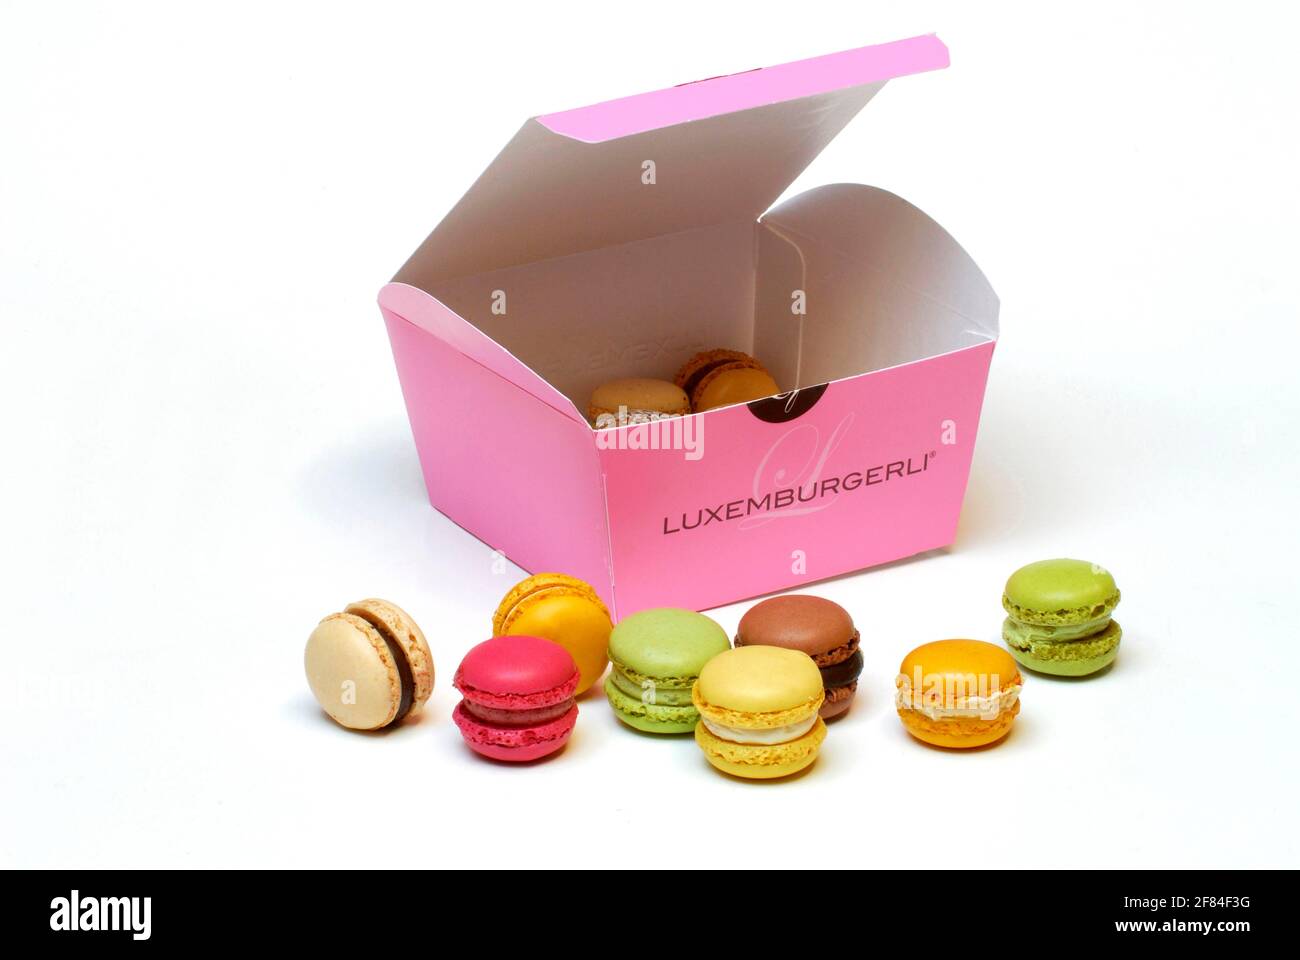 Luxemburgerli confectionery with packaging, Macaron, speciality of Confiserie Spruengli, cardboard box Stock Photo